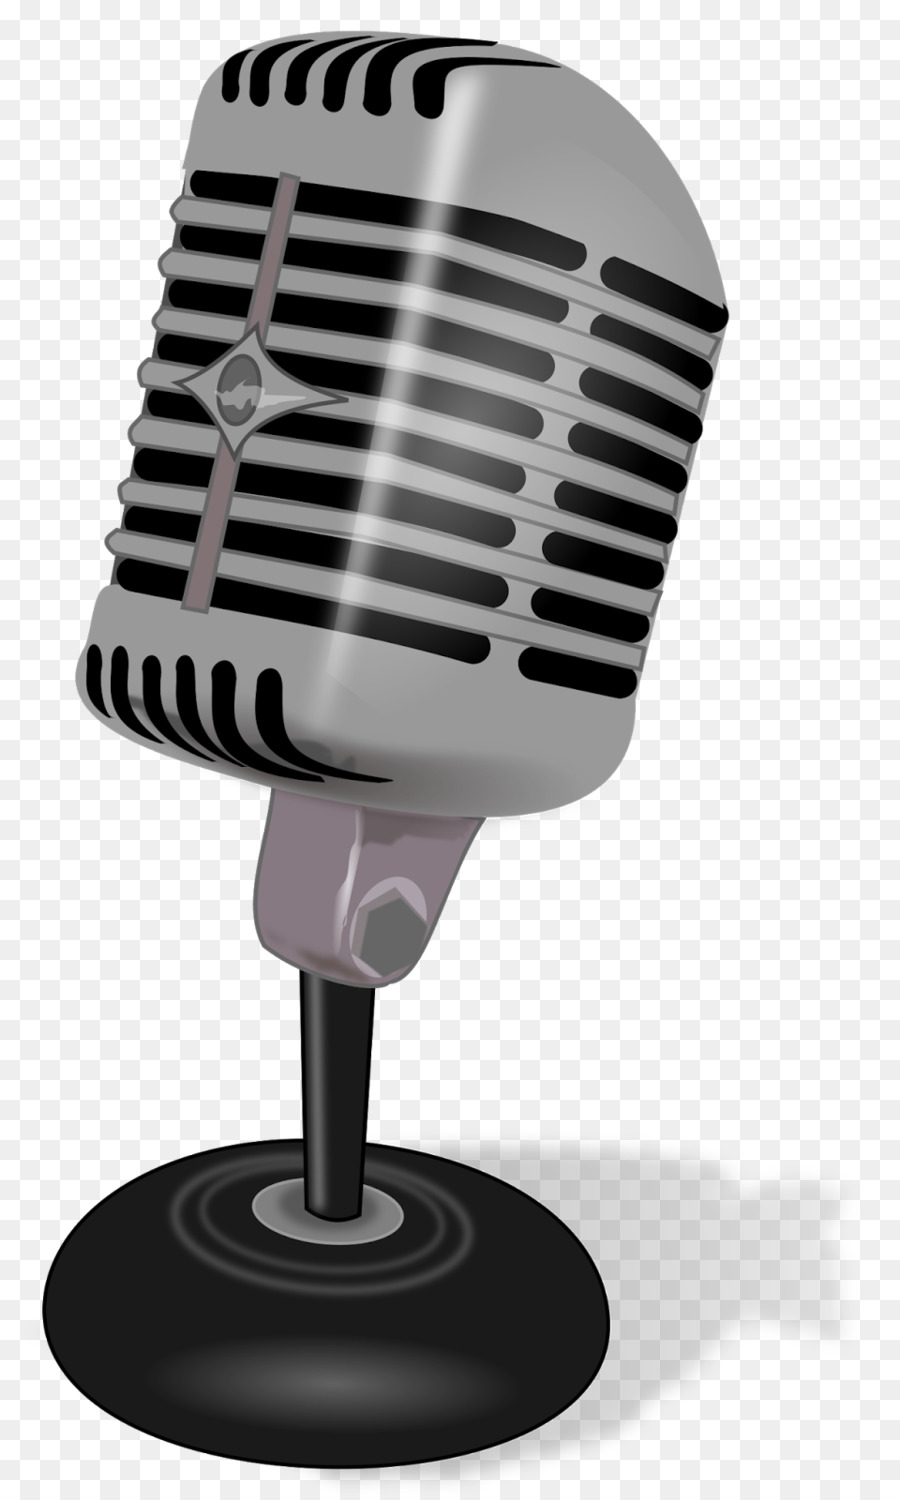 Microphone Clip art - microphone png download - 960*1600 - Free Transparent Microphone png Download.